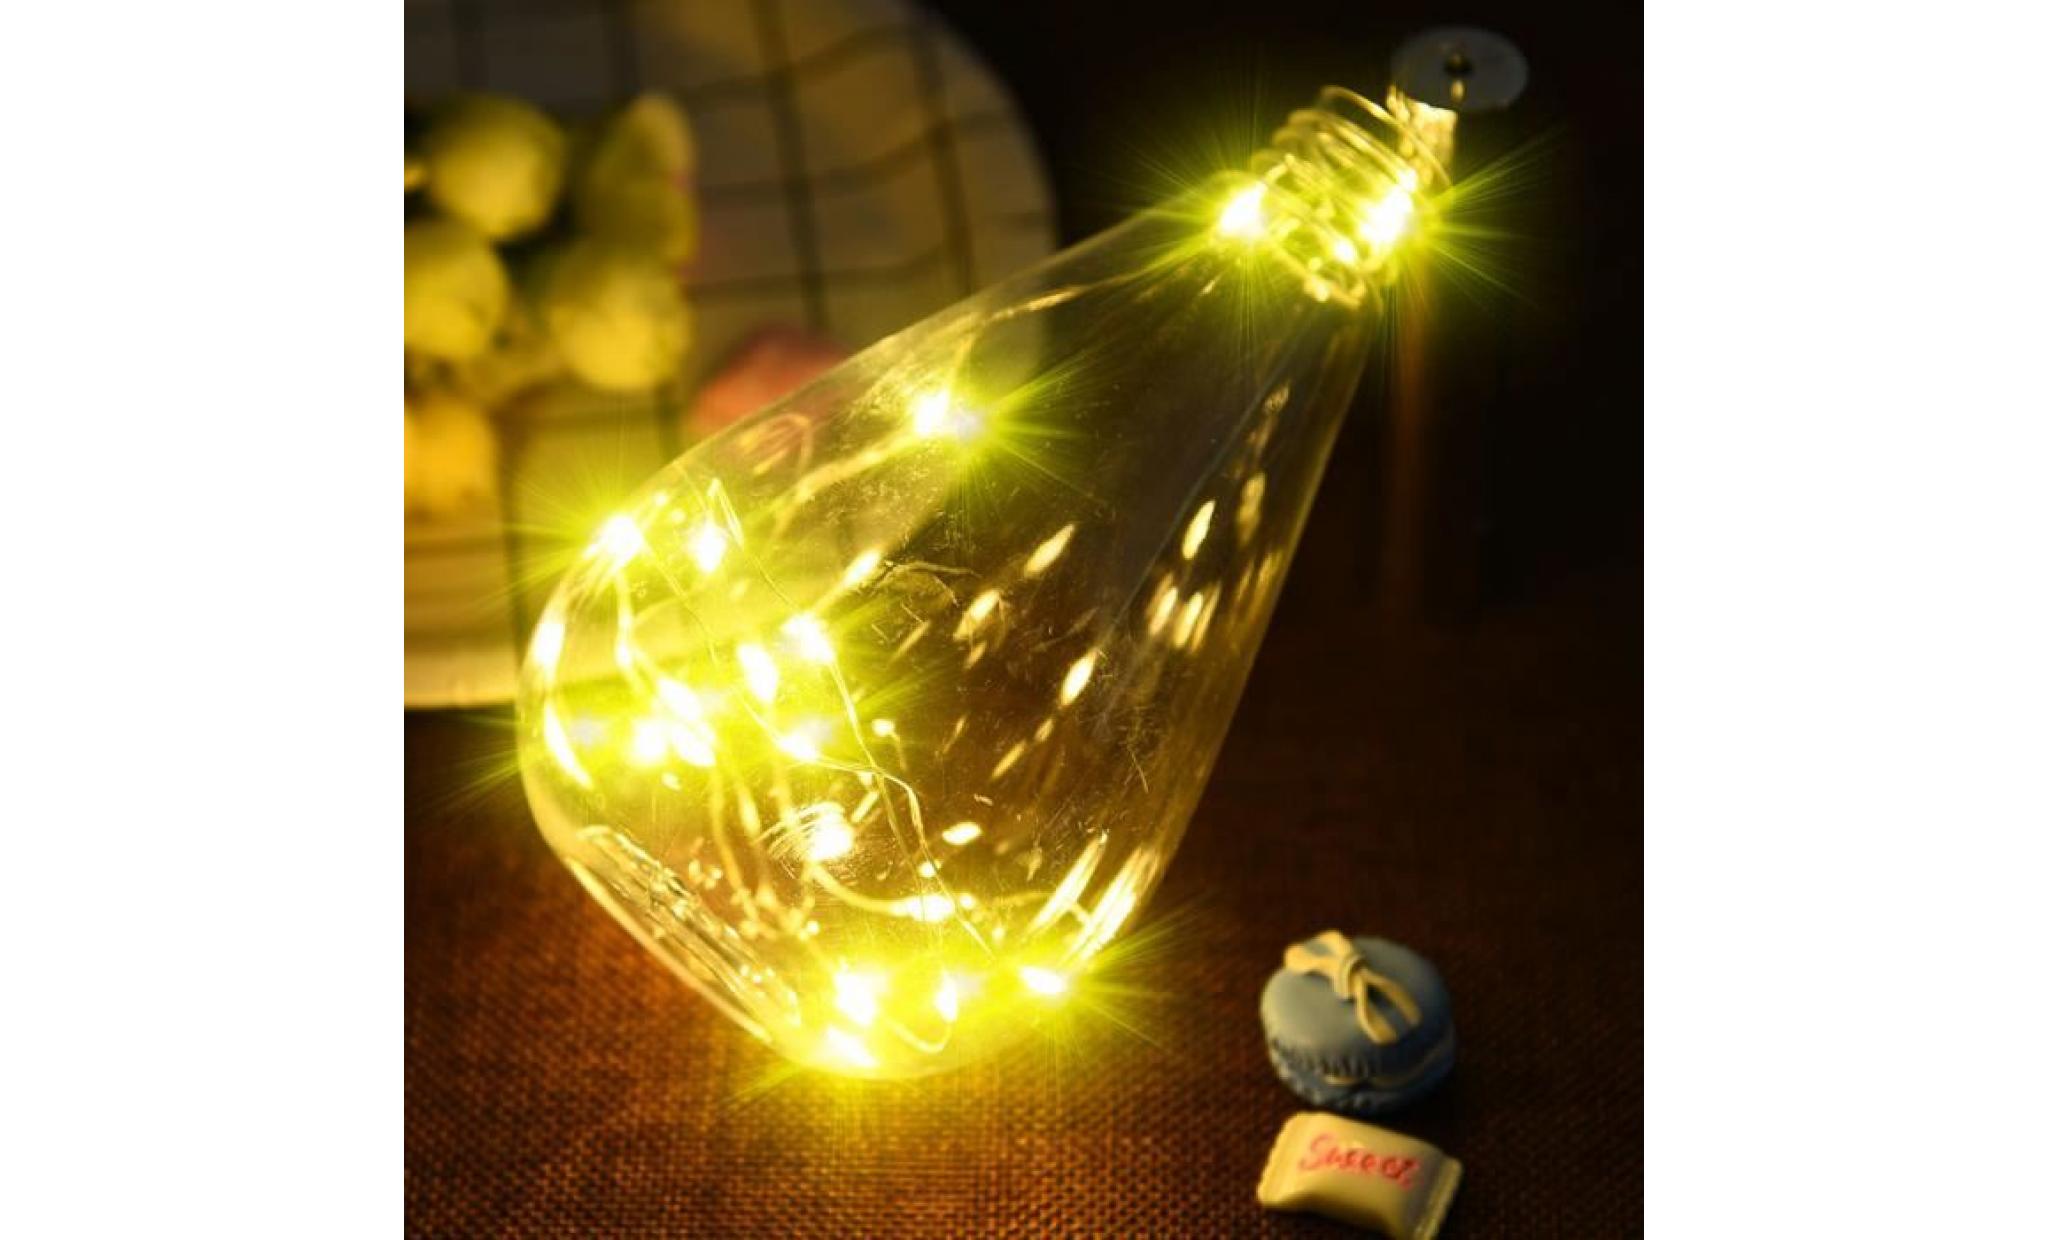 20 led bright colorful bottle light kit fairy lights battery top wedding decorat pageare1612 pageare1612 pas cher